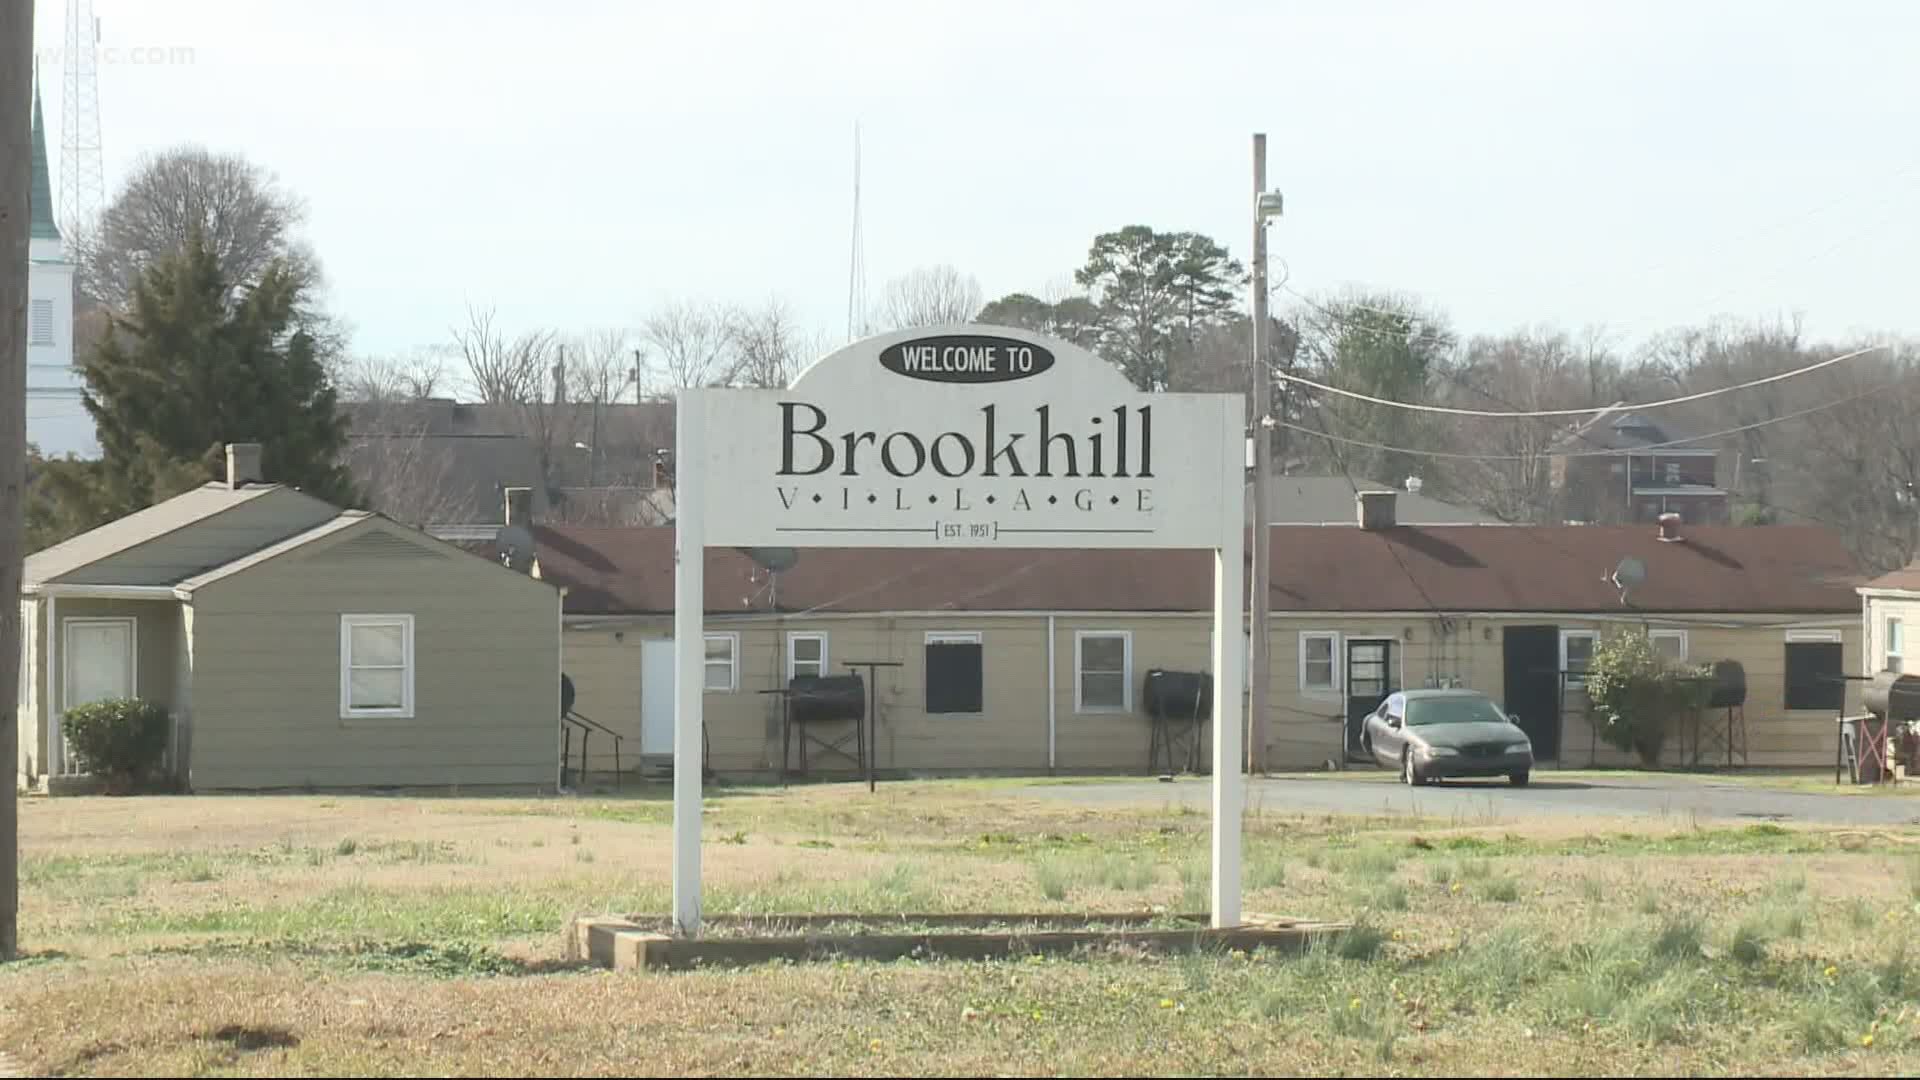 We could soon have an answer to what's next for the Brookhill Village Development plan.